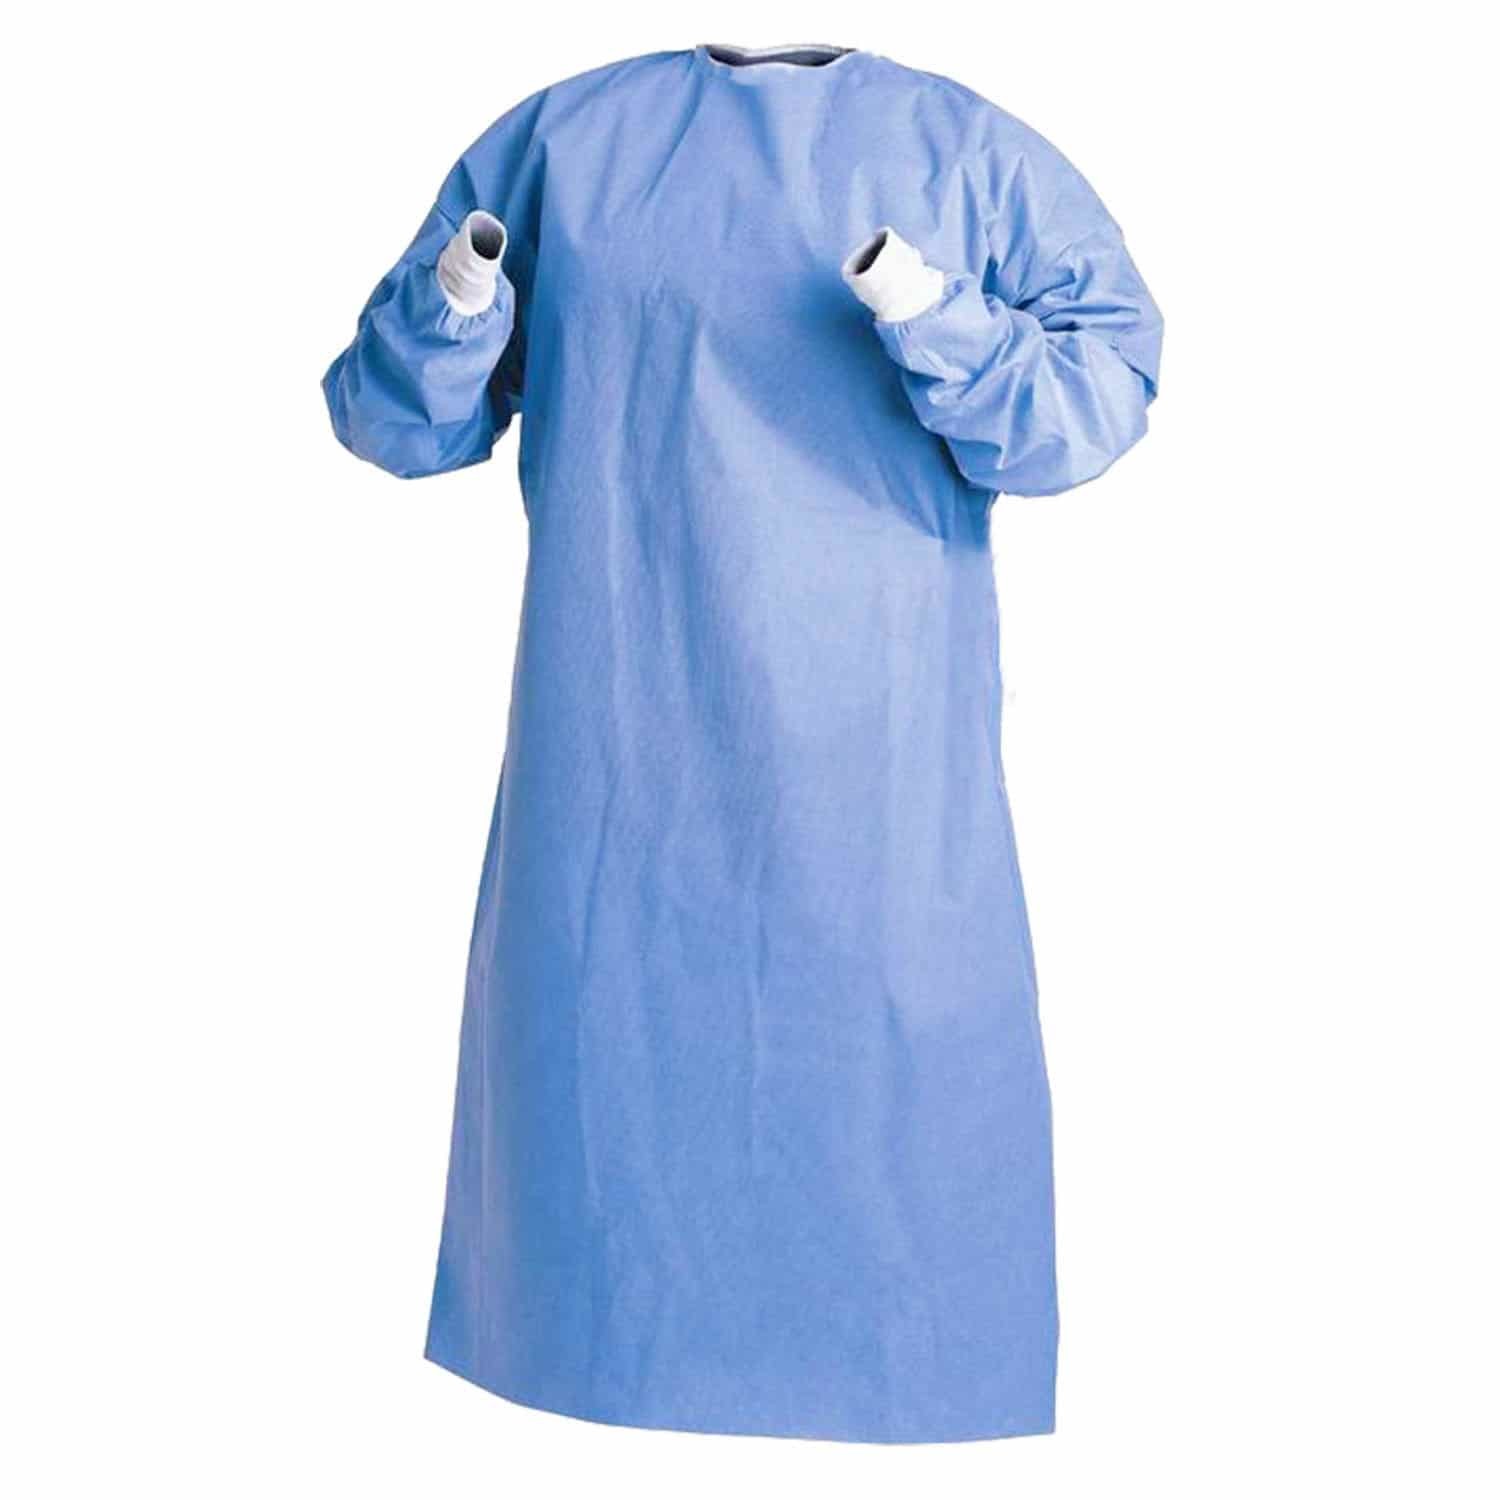 Isolation Gown AAMI Level 3-INTCO Protects Your Health